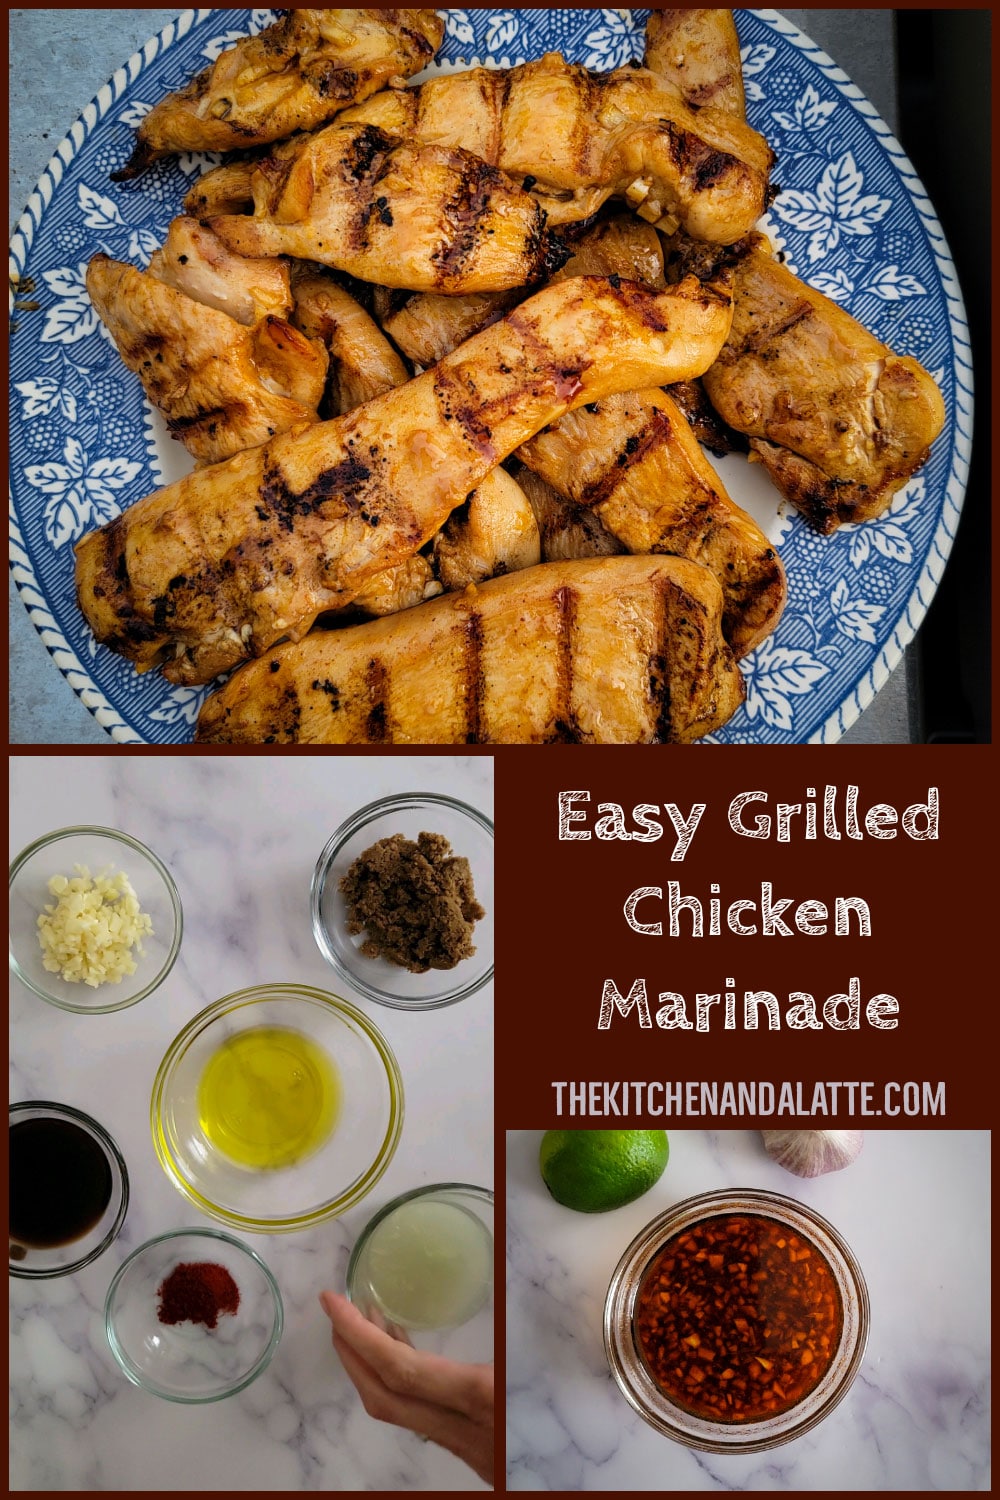 Pinterest image - 3 pictures. 1 is chicken on plate after grilling, 1 is the marinade ingredients in small prep bowls and 1 is the marinade prepared and in a bowl.